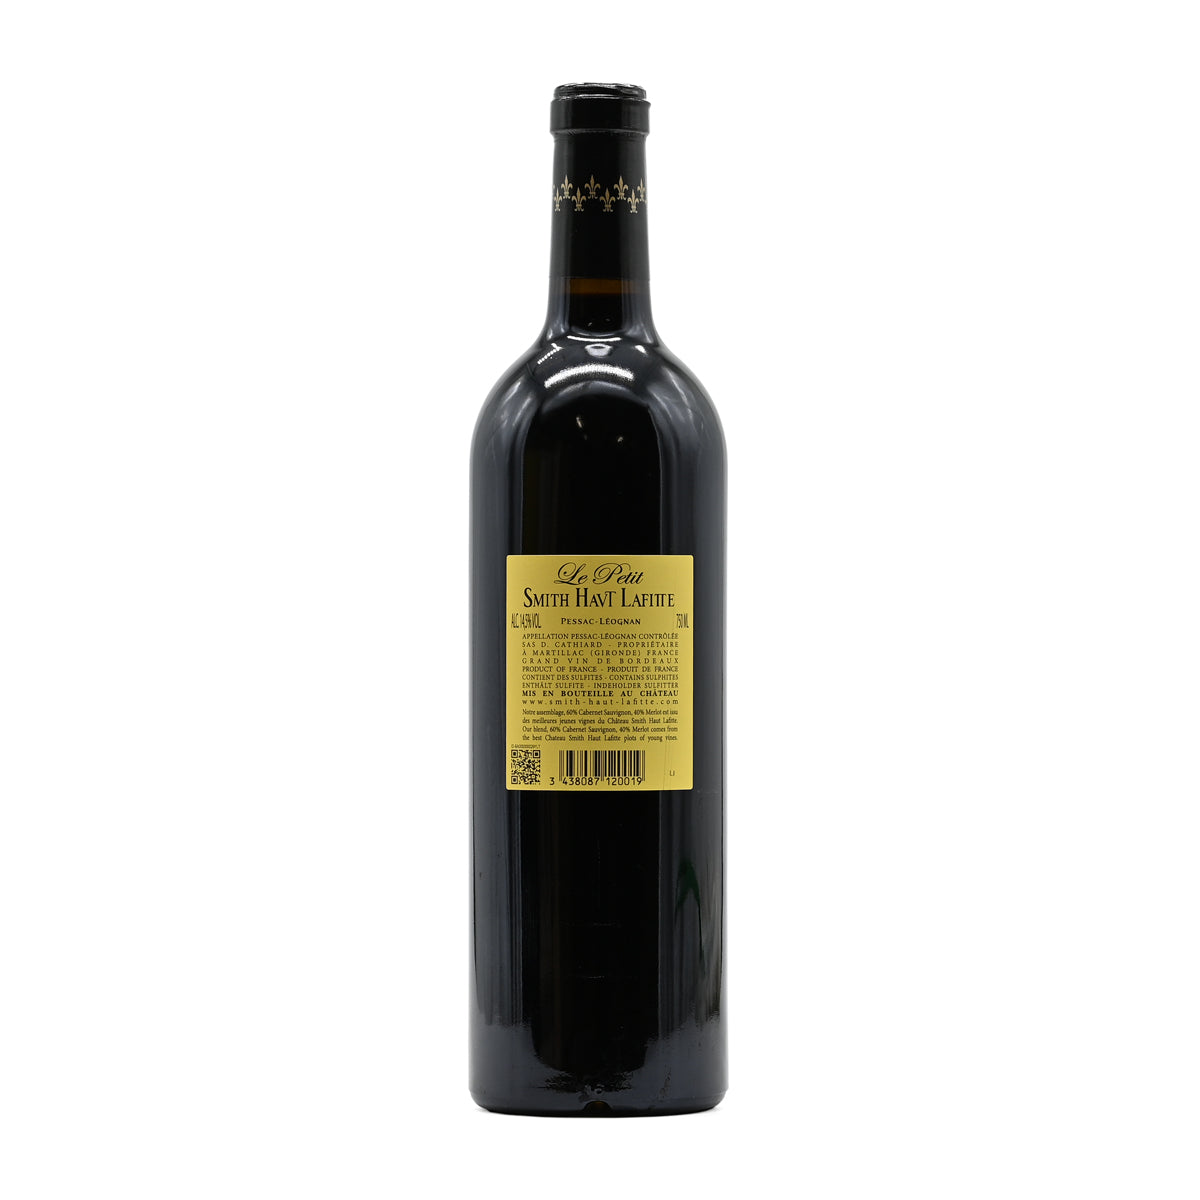 Petit Smith Haut Lafitte Rouge 2020, 750ml French red wine, made from a blend of Merlot and Cabernet Sauvignon; from Pessac Leognan, Bordeaux, France – GDV Fine Wines, Hong Kong